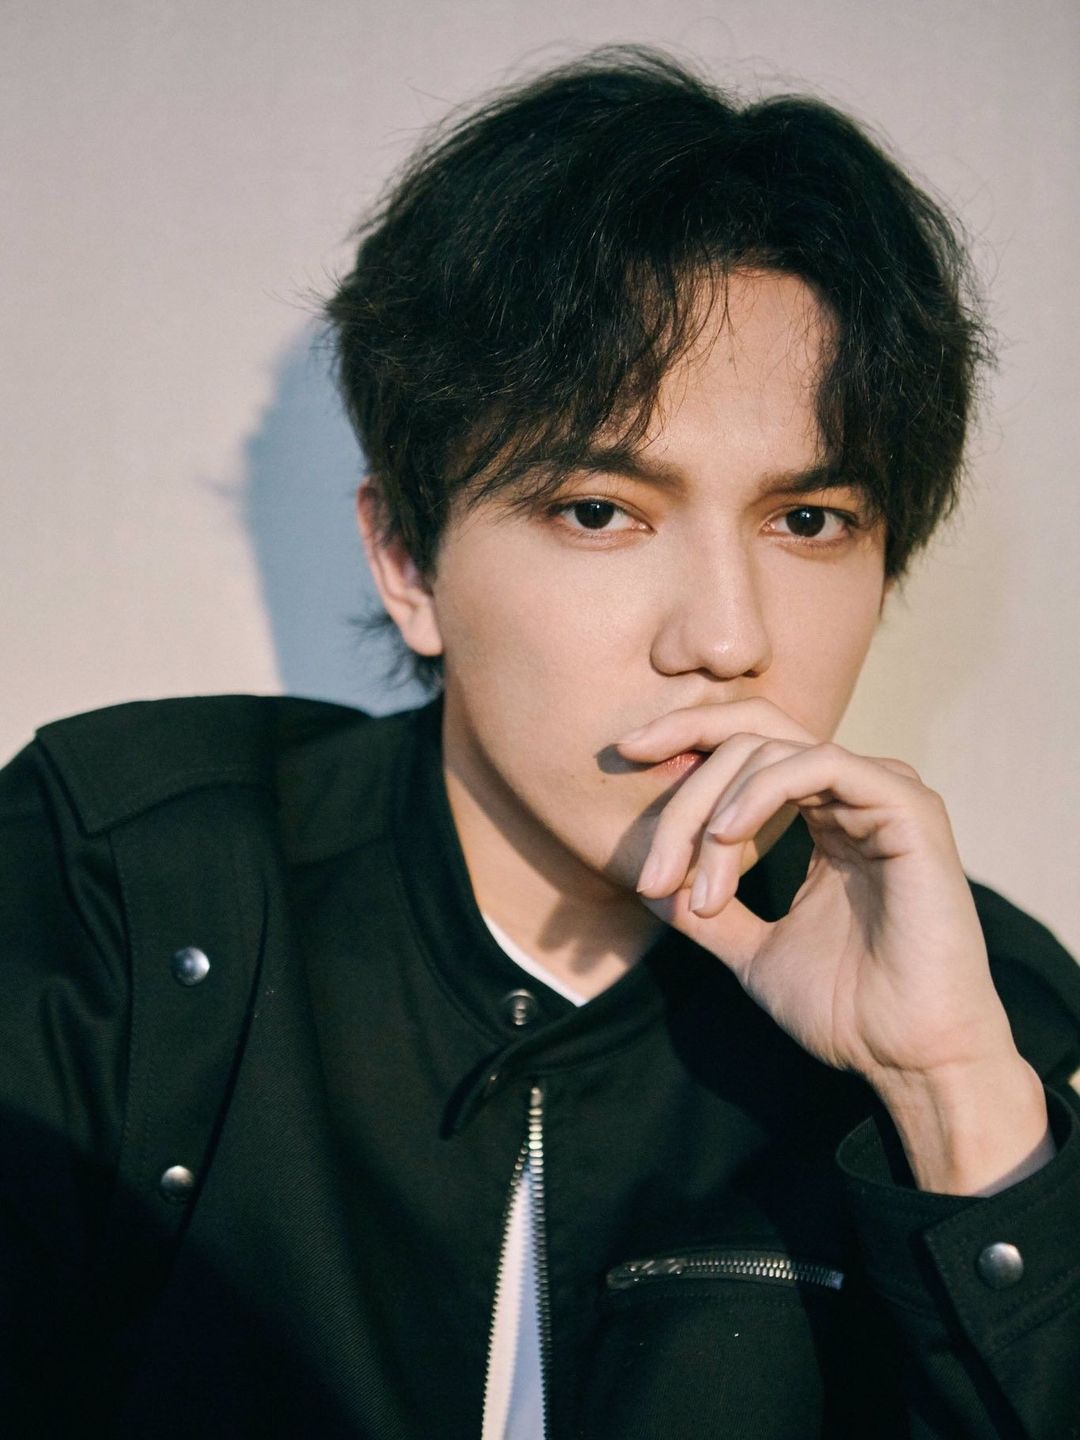 Dimash Kudaibergen how did he became famous